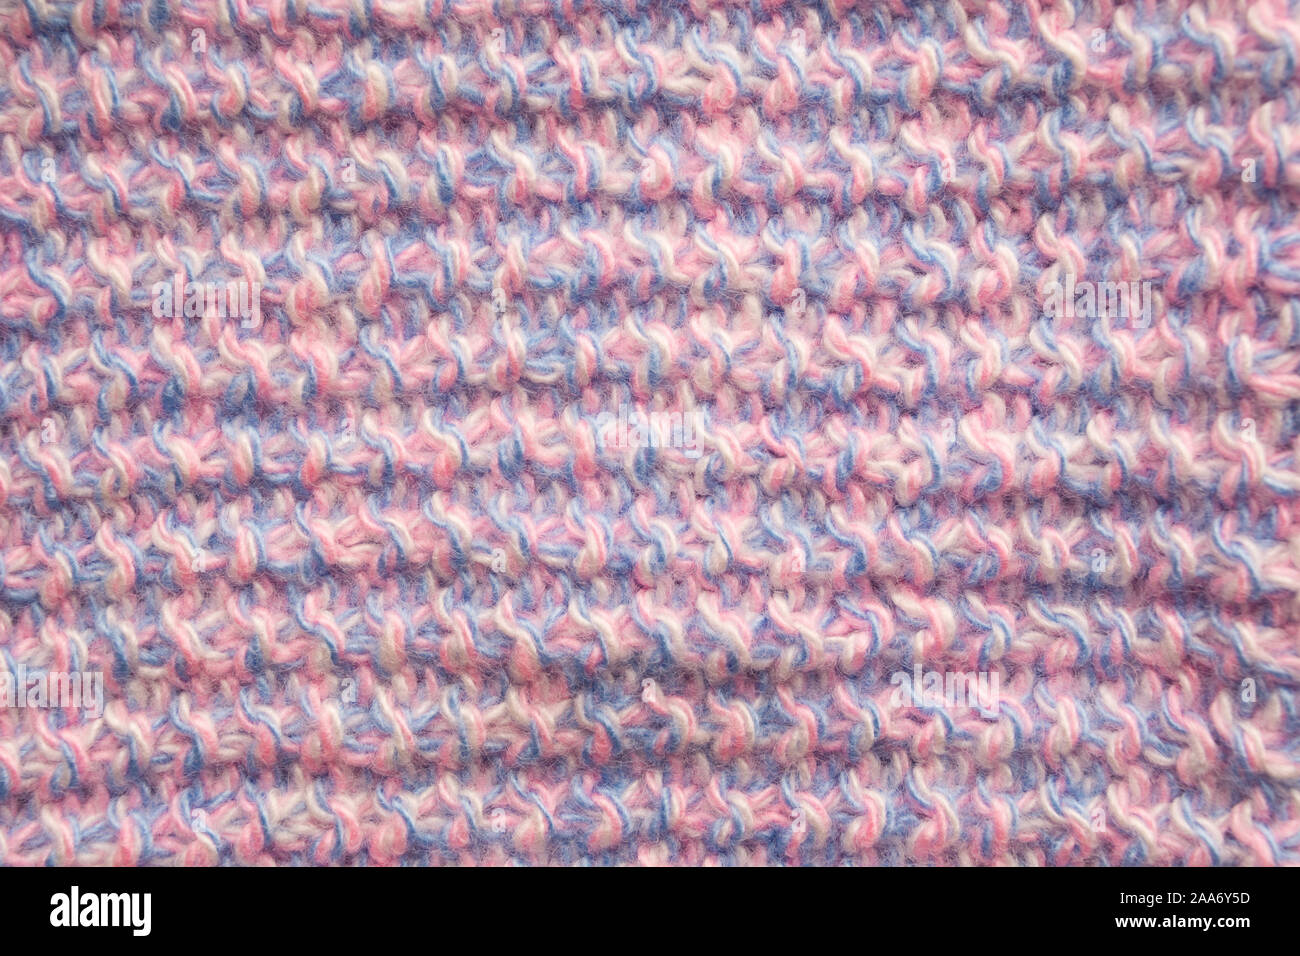 Pink and blue woolen textured pattern background. Material textile surface for clothes. Fashion handmade backdrop. Horizontal stripes Stock Photo